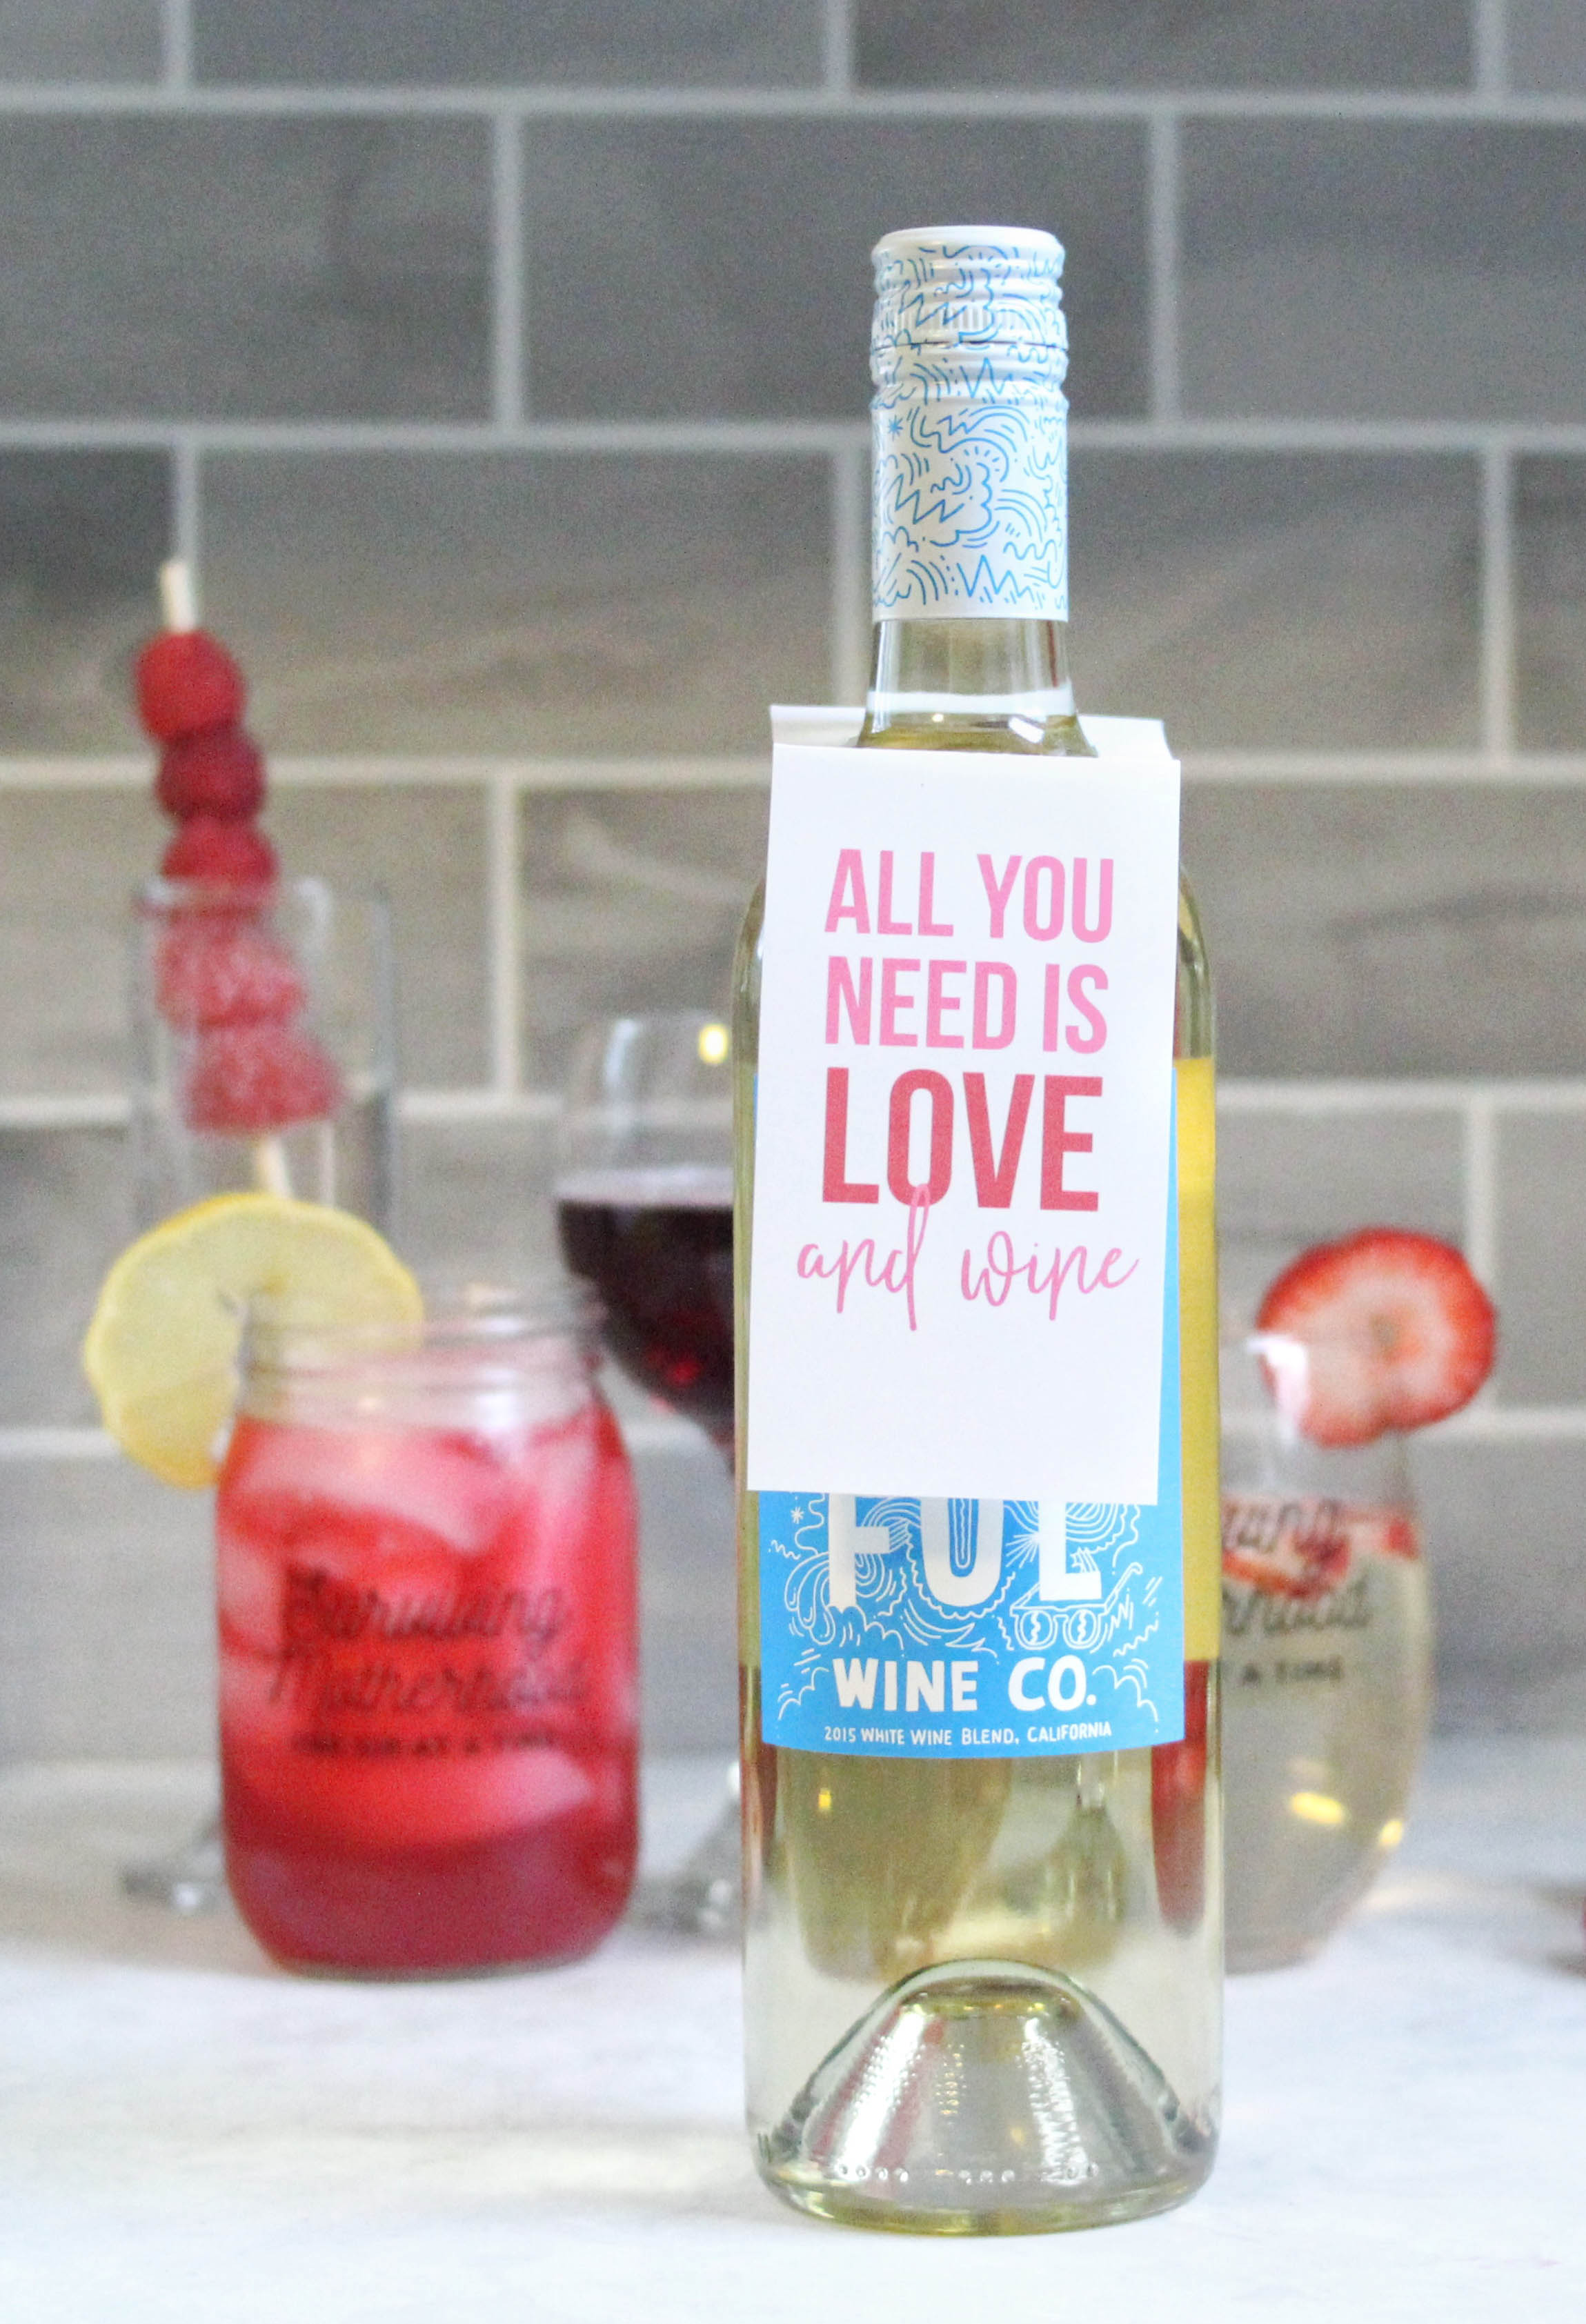 alentine's Day cocktail and mocktail recipes. Drinks + spritzers for Galentine's Day, with free printable wine tags for Valentine's Day! www.momlifemusthaves.com